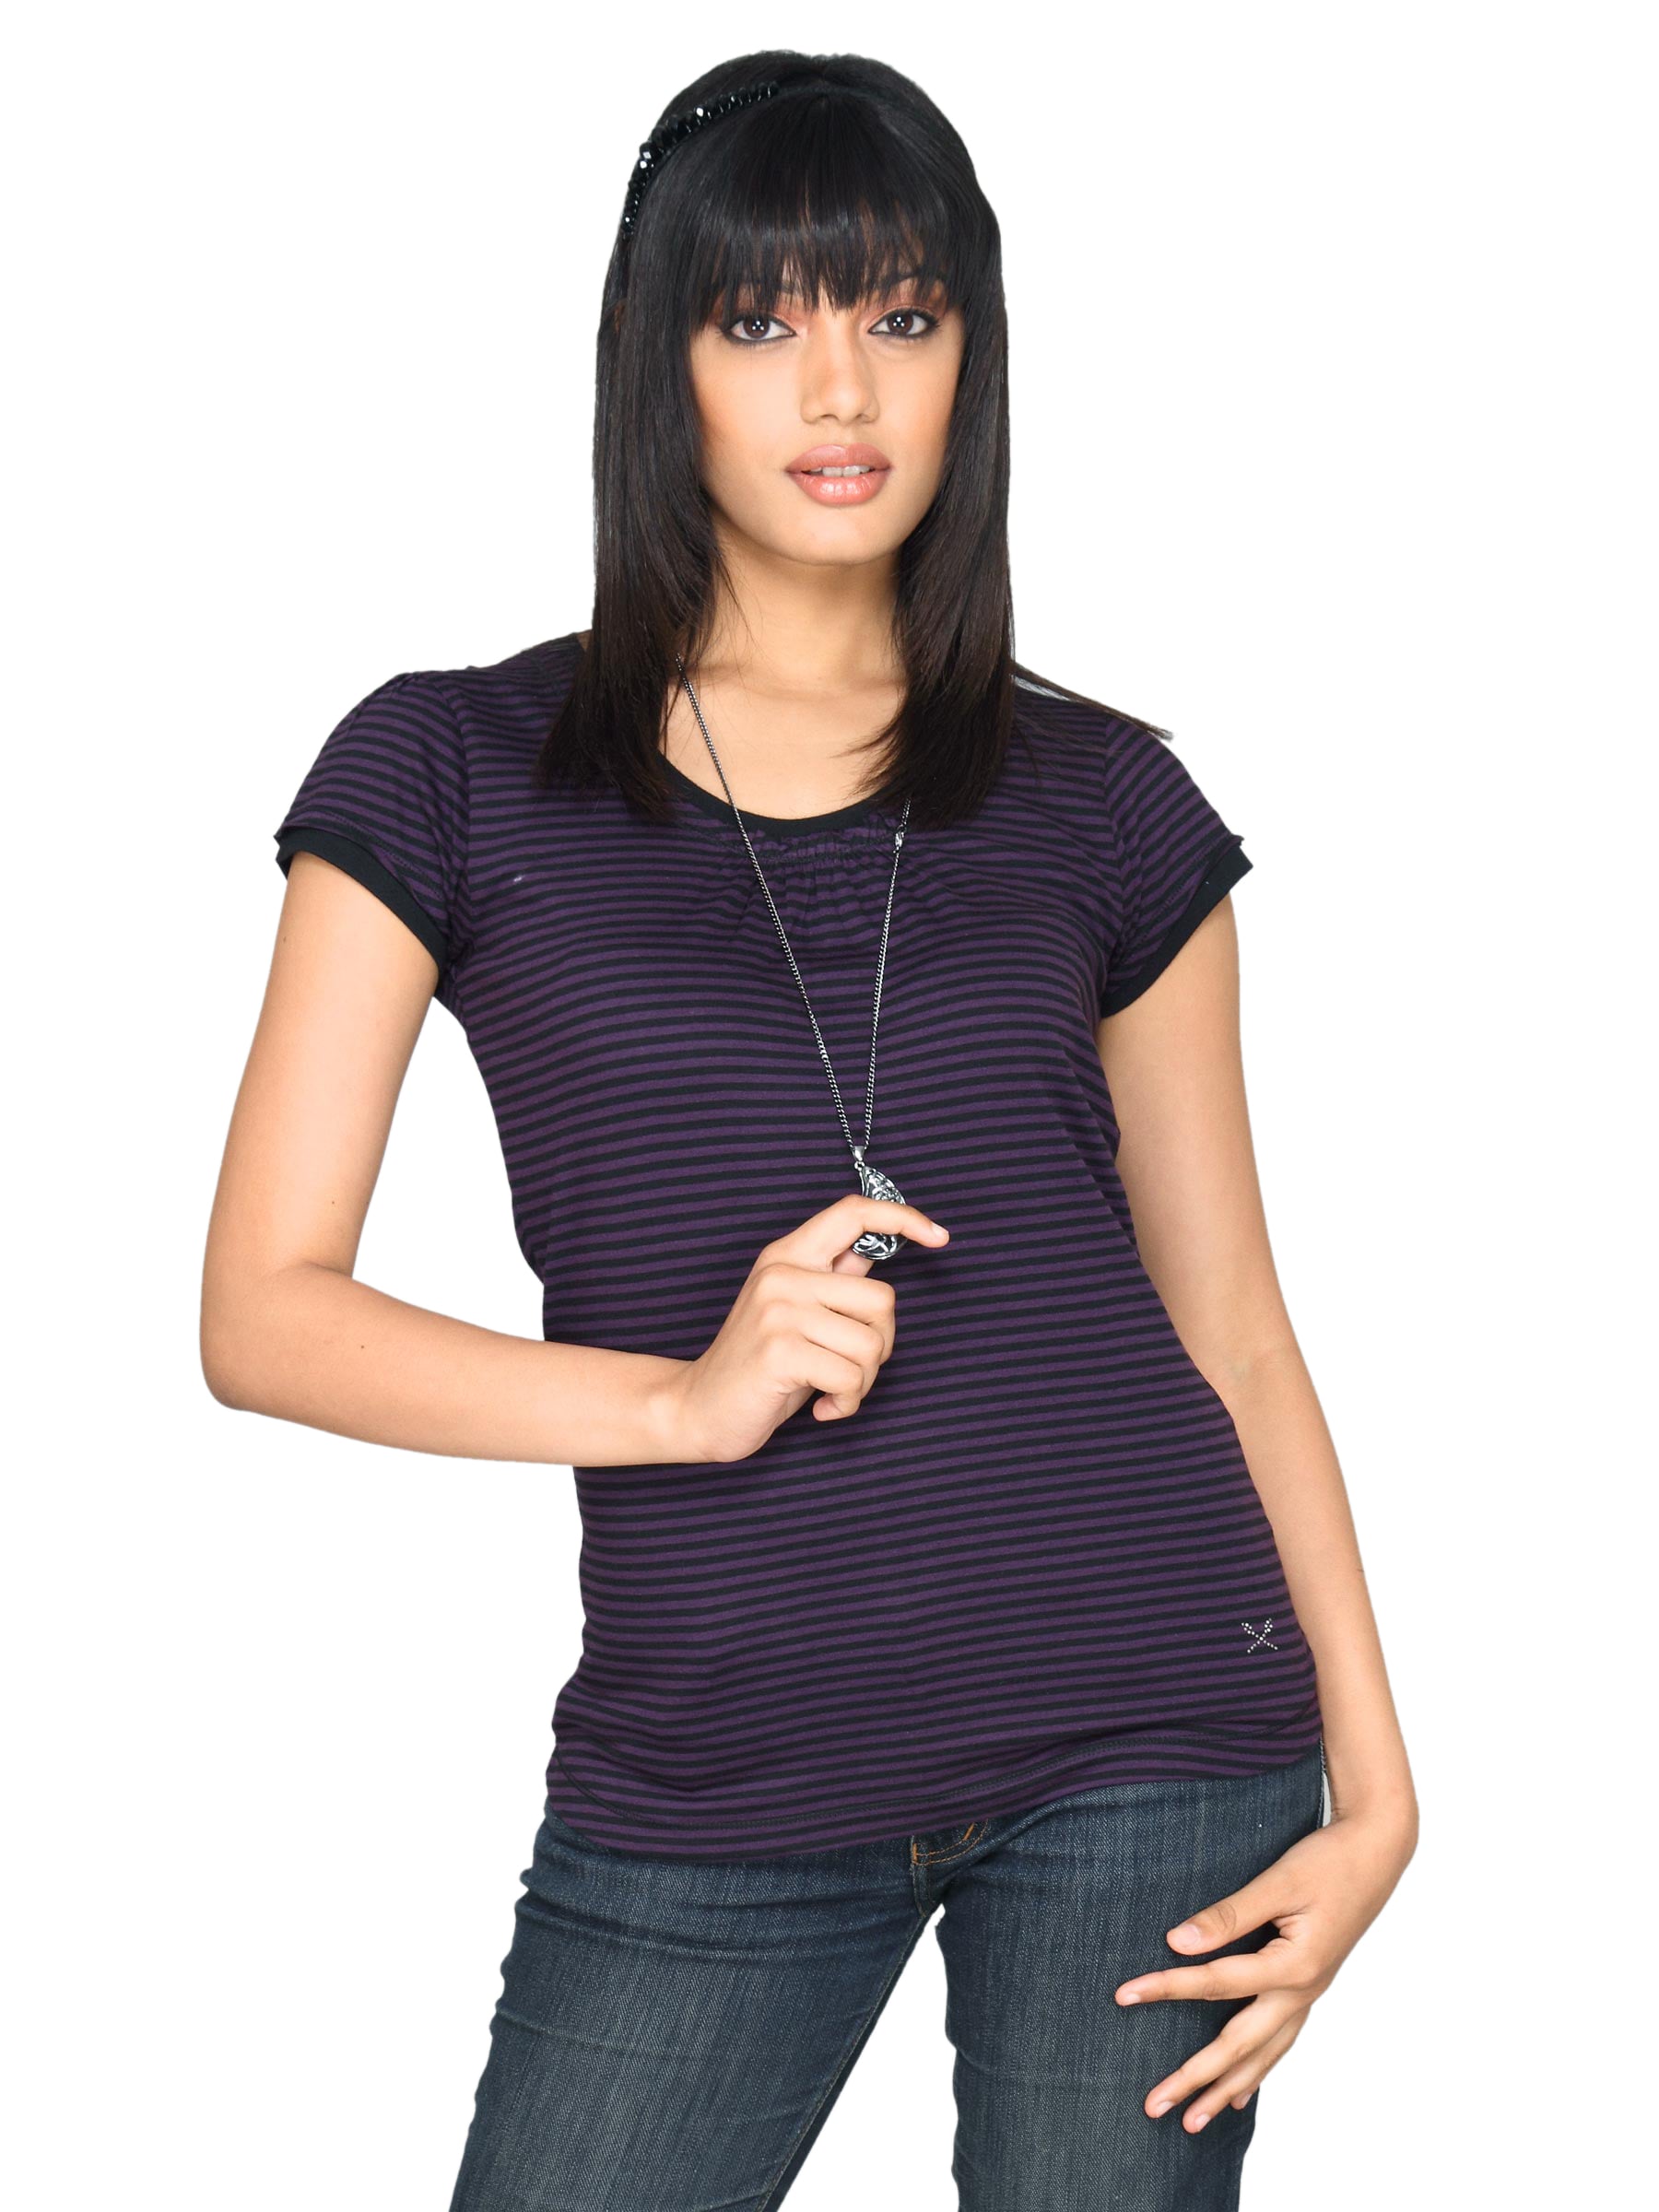 Scullers For Her Women's Wow Knit Black Purple Top